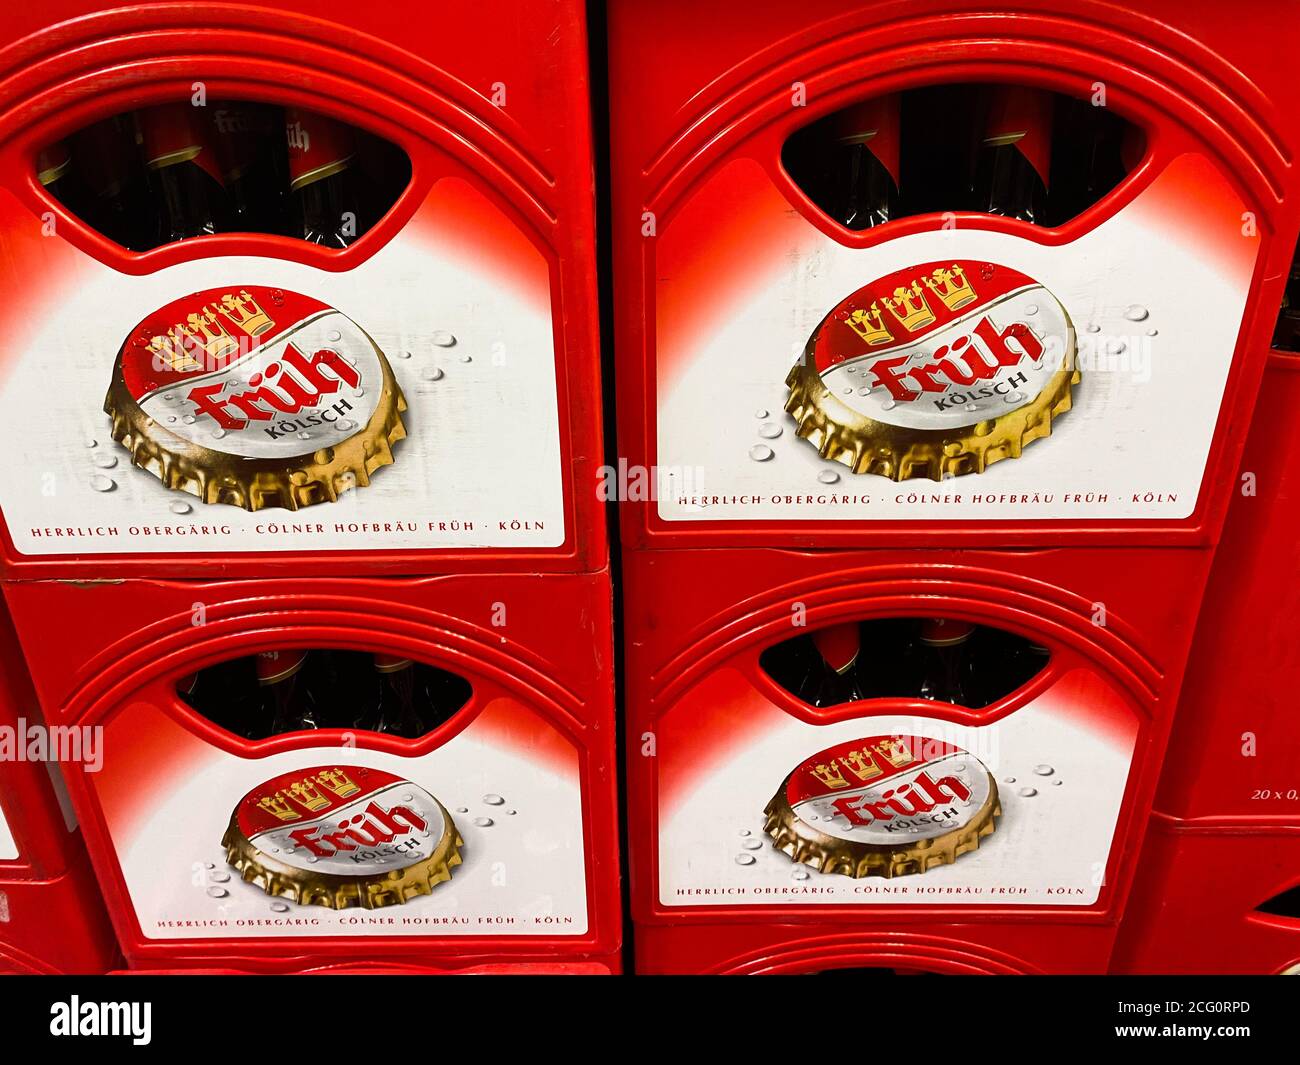 Viersen, Germany - July 9. 2020: View on stack of red cases with Früh Kölsch beer from cologne in german supermarket (fokus left) Stock Photo